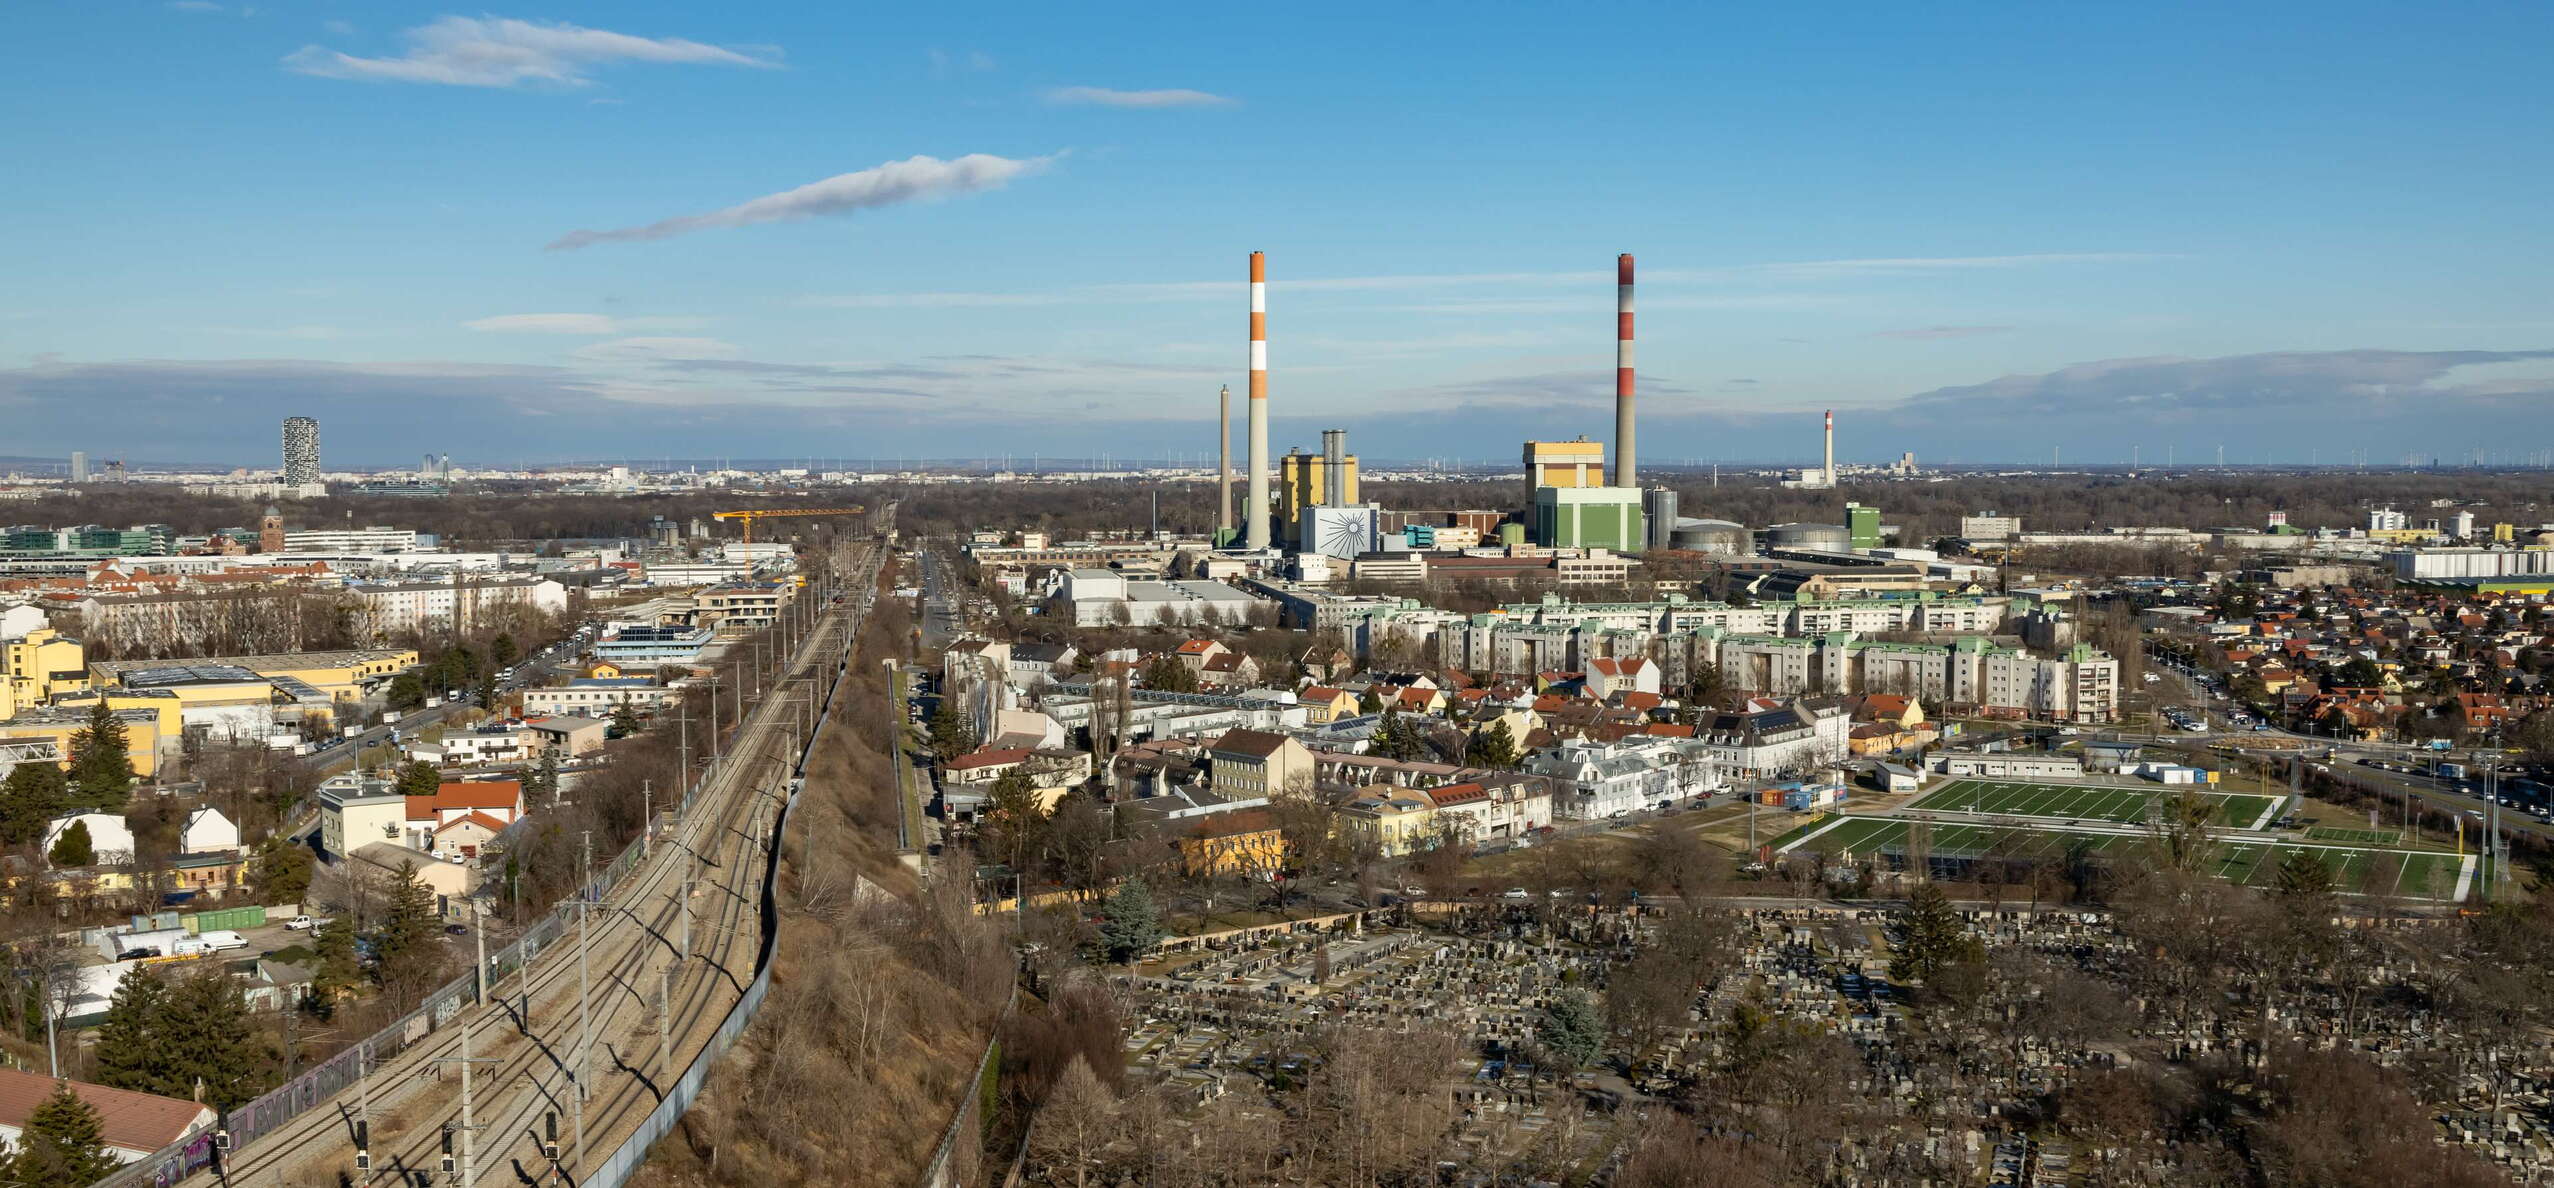 Wien | Simmering with cemetery and power plant